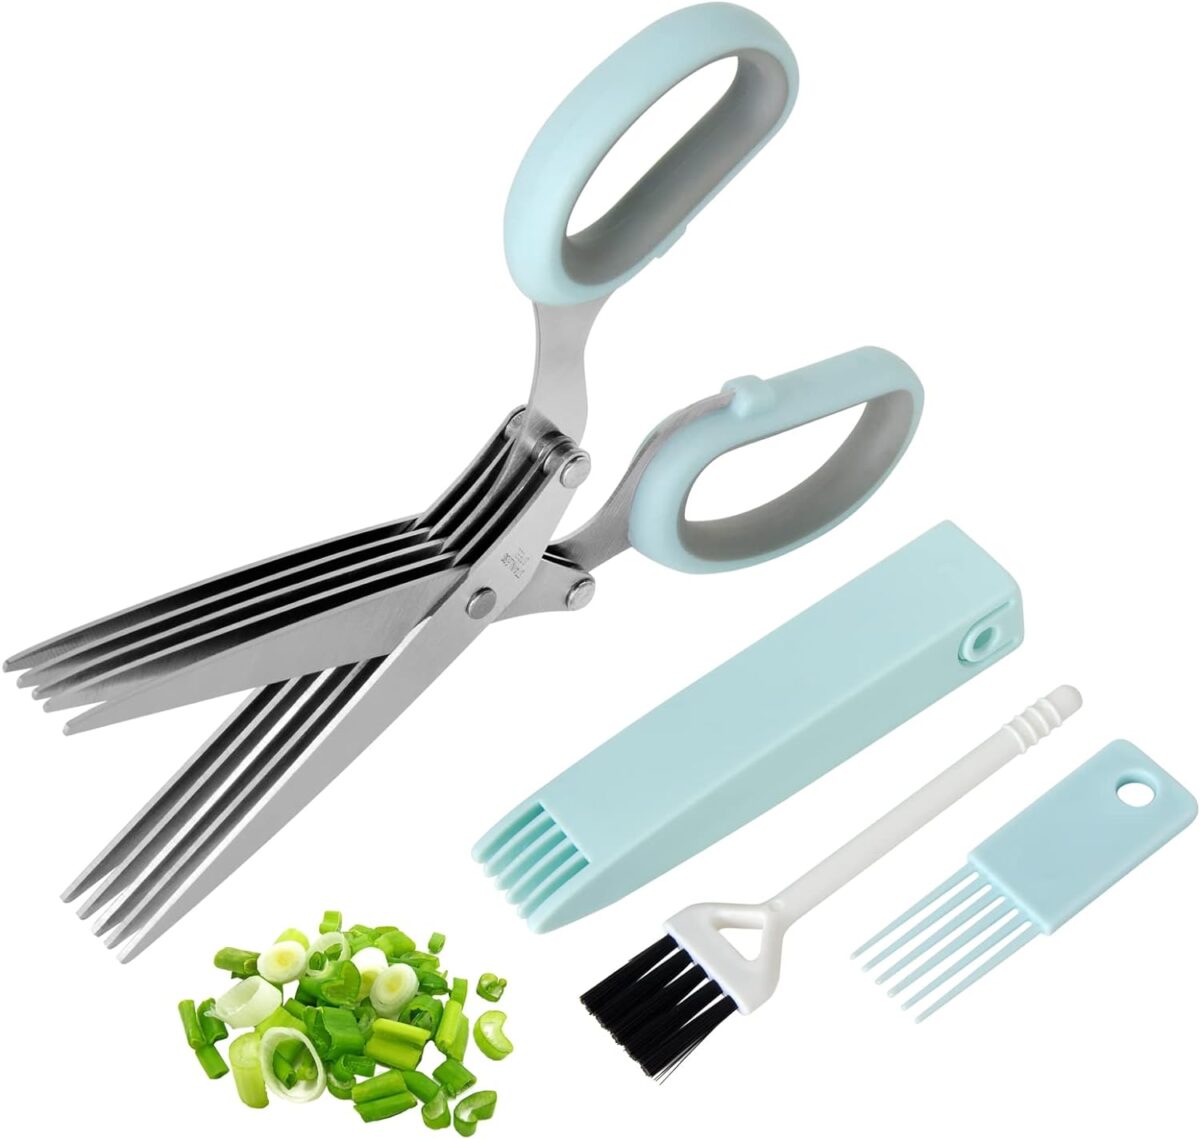 A set of kitchen gifts including scissors, a knife, and a chopping board.